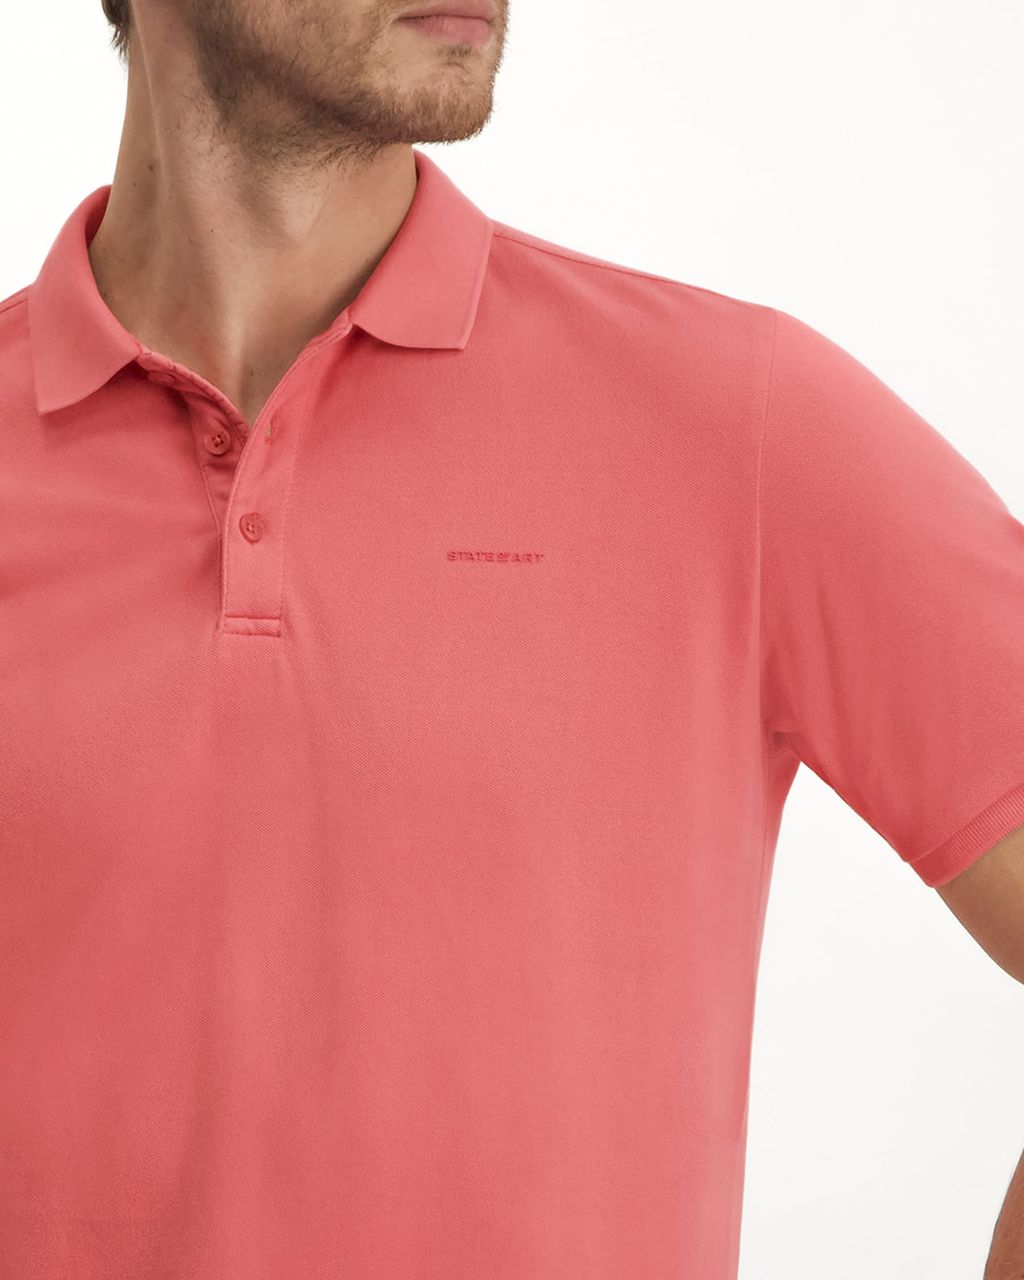 State of Art Polo KM Rood 075931-001-4XL